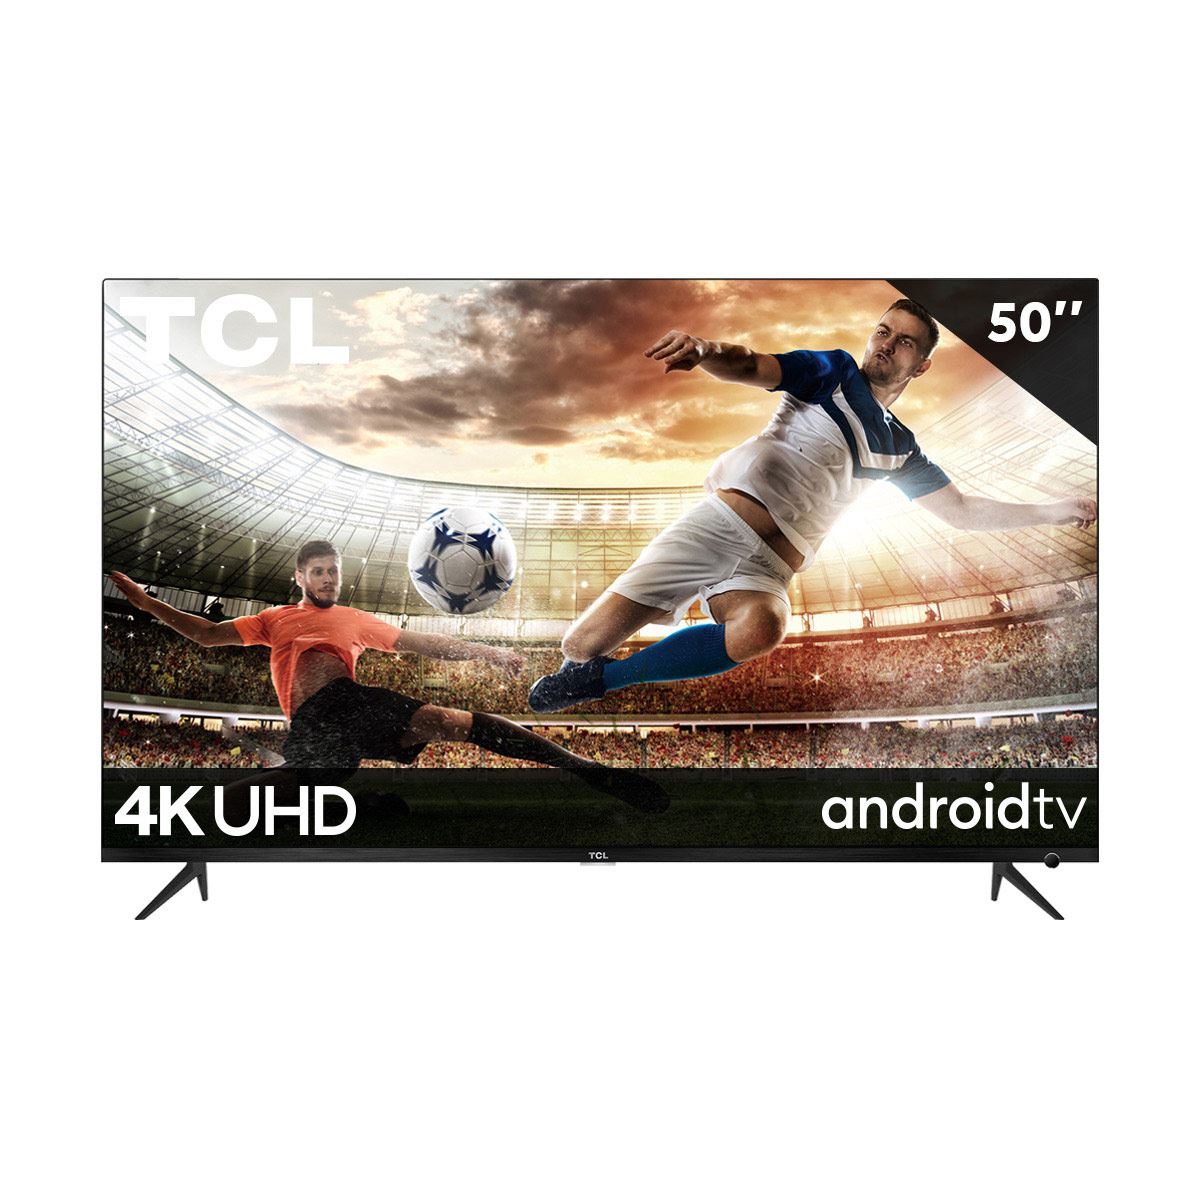 Pantalla TCL 50" 4K/UHD (Android TV) Dolby Vision + Dolby Atmos 50A527